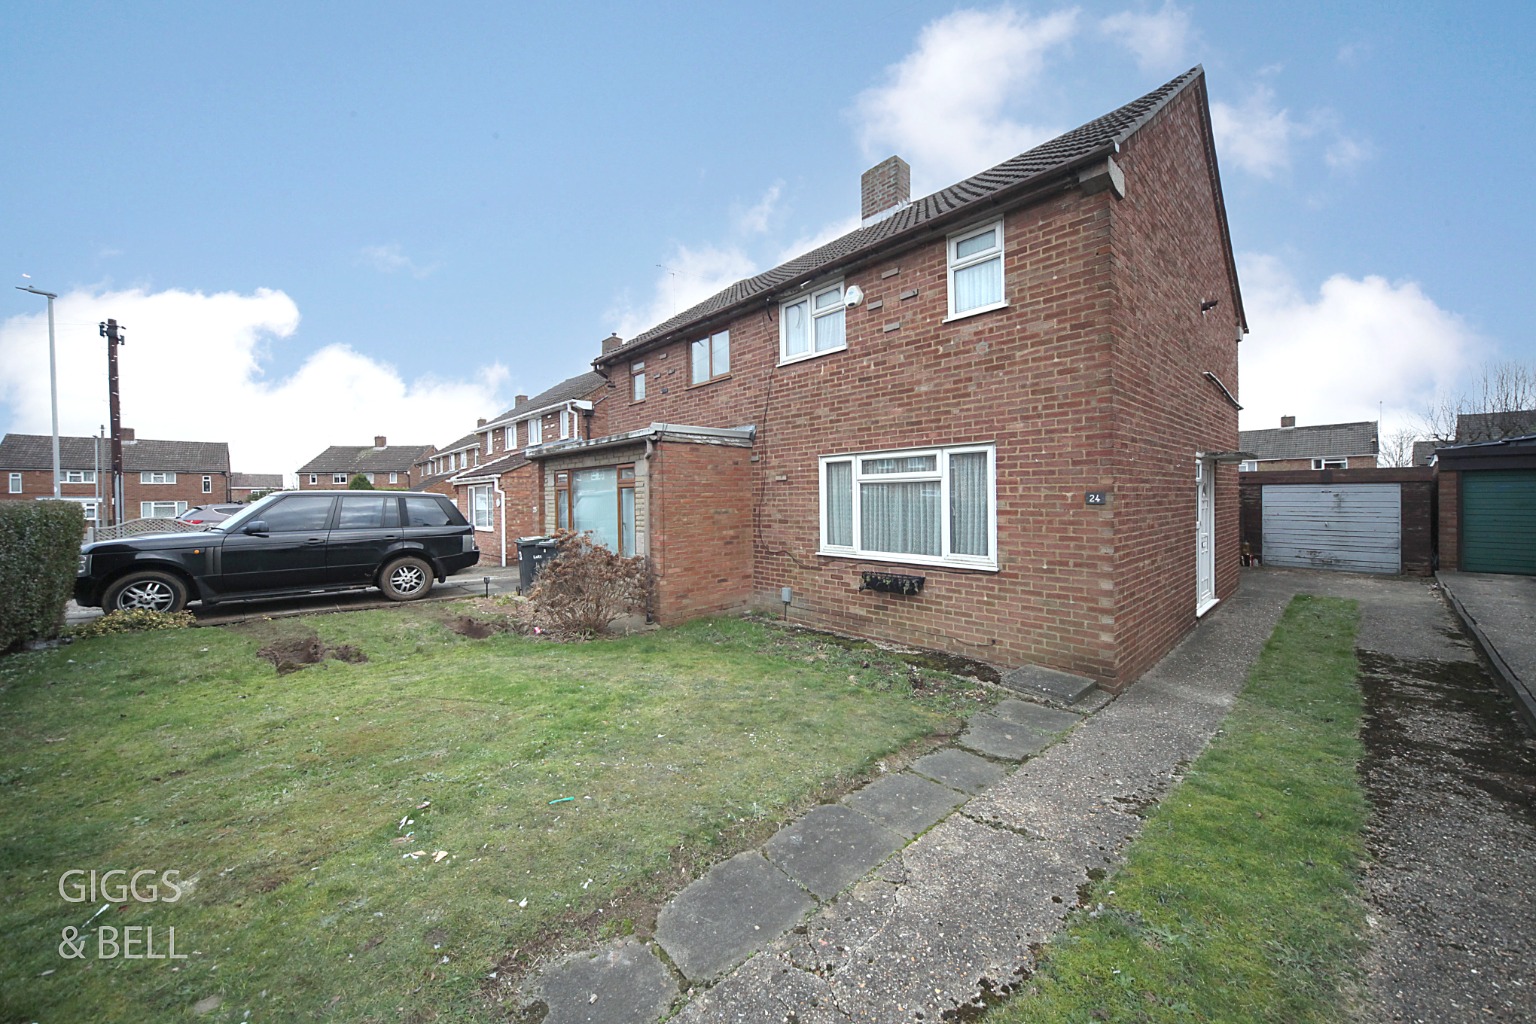 2 bed semi-detached house for sale in Holtsmere Close, Luton, LU2 